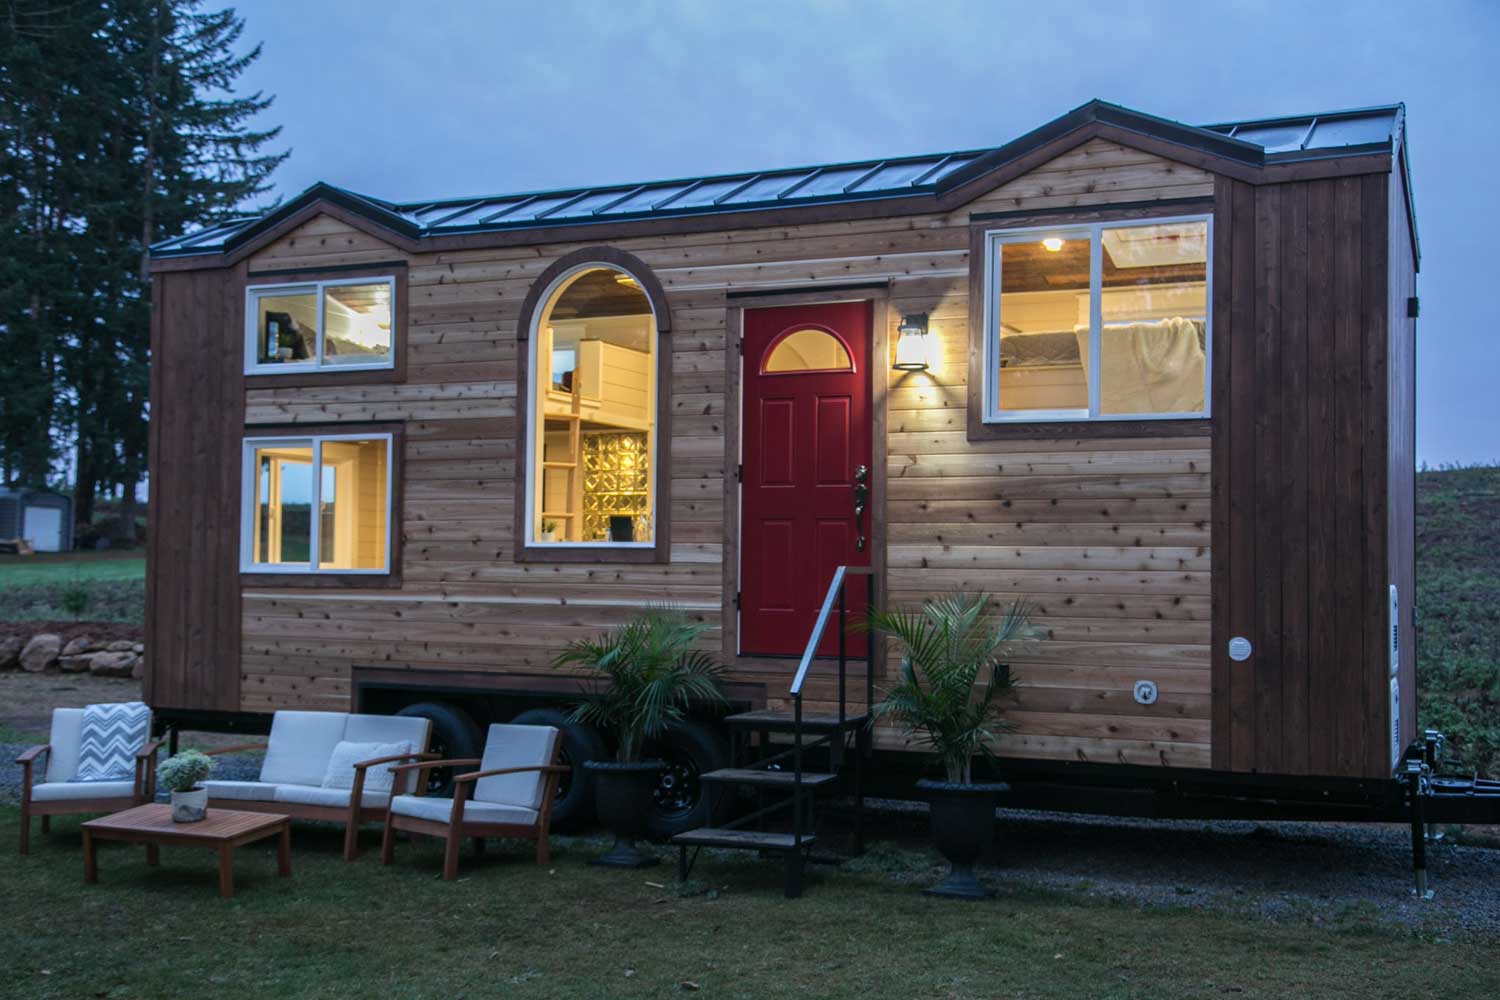 Outside view of the Theater Home custom tiny house lit up at night